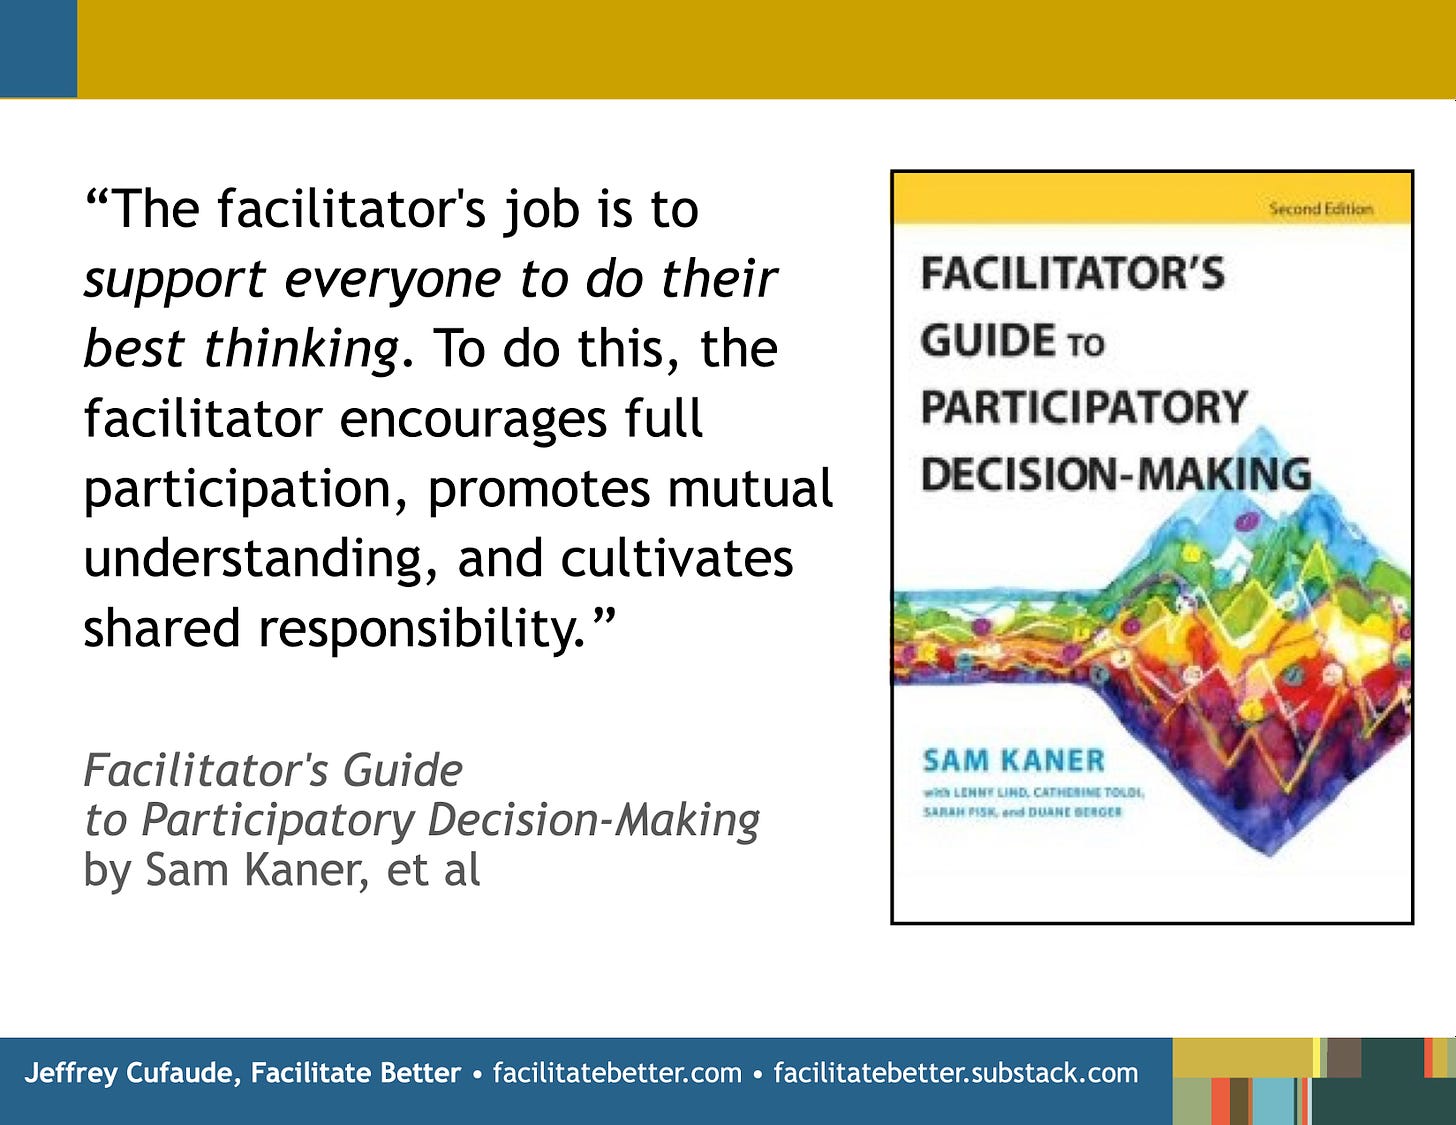 Picture of the book cover the Facilitator's Guide to Participatory Decision-Making